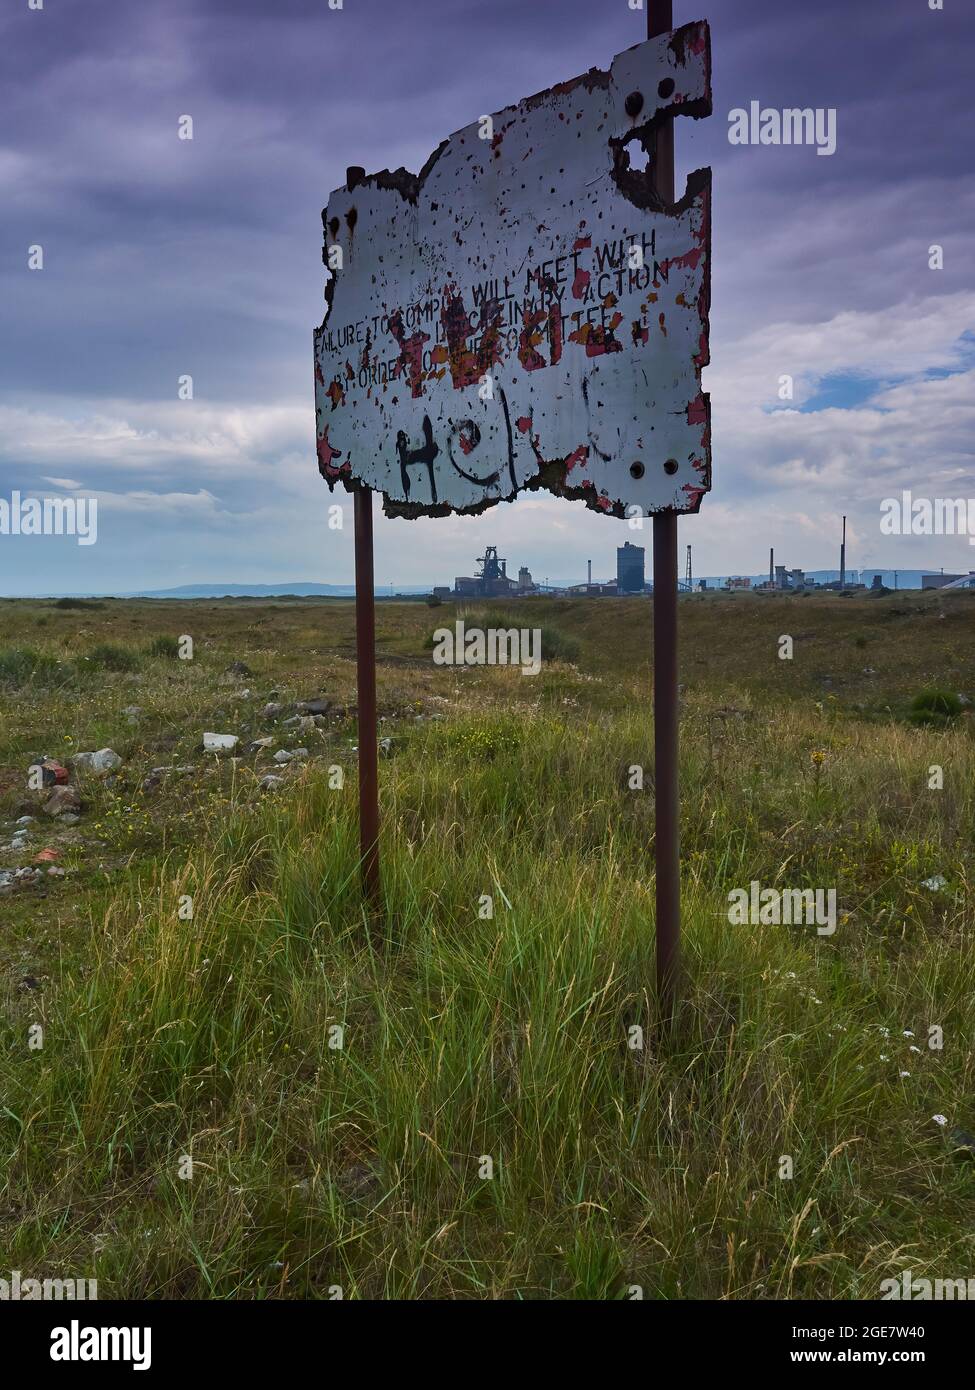 An illegible, disintegrating sign in the slag fields, its posts framing the abandoned Redcar steel mill on the horizon, under a dramatic clouded sky. Stock Photo